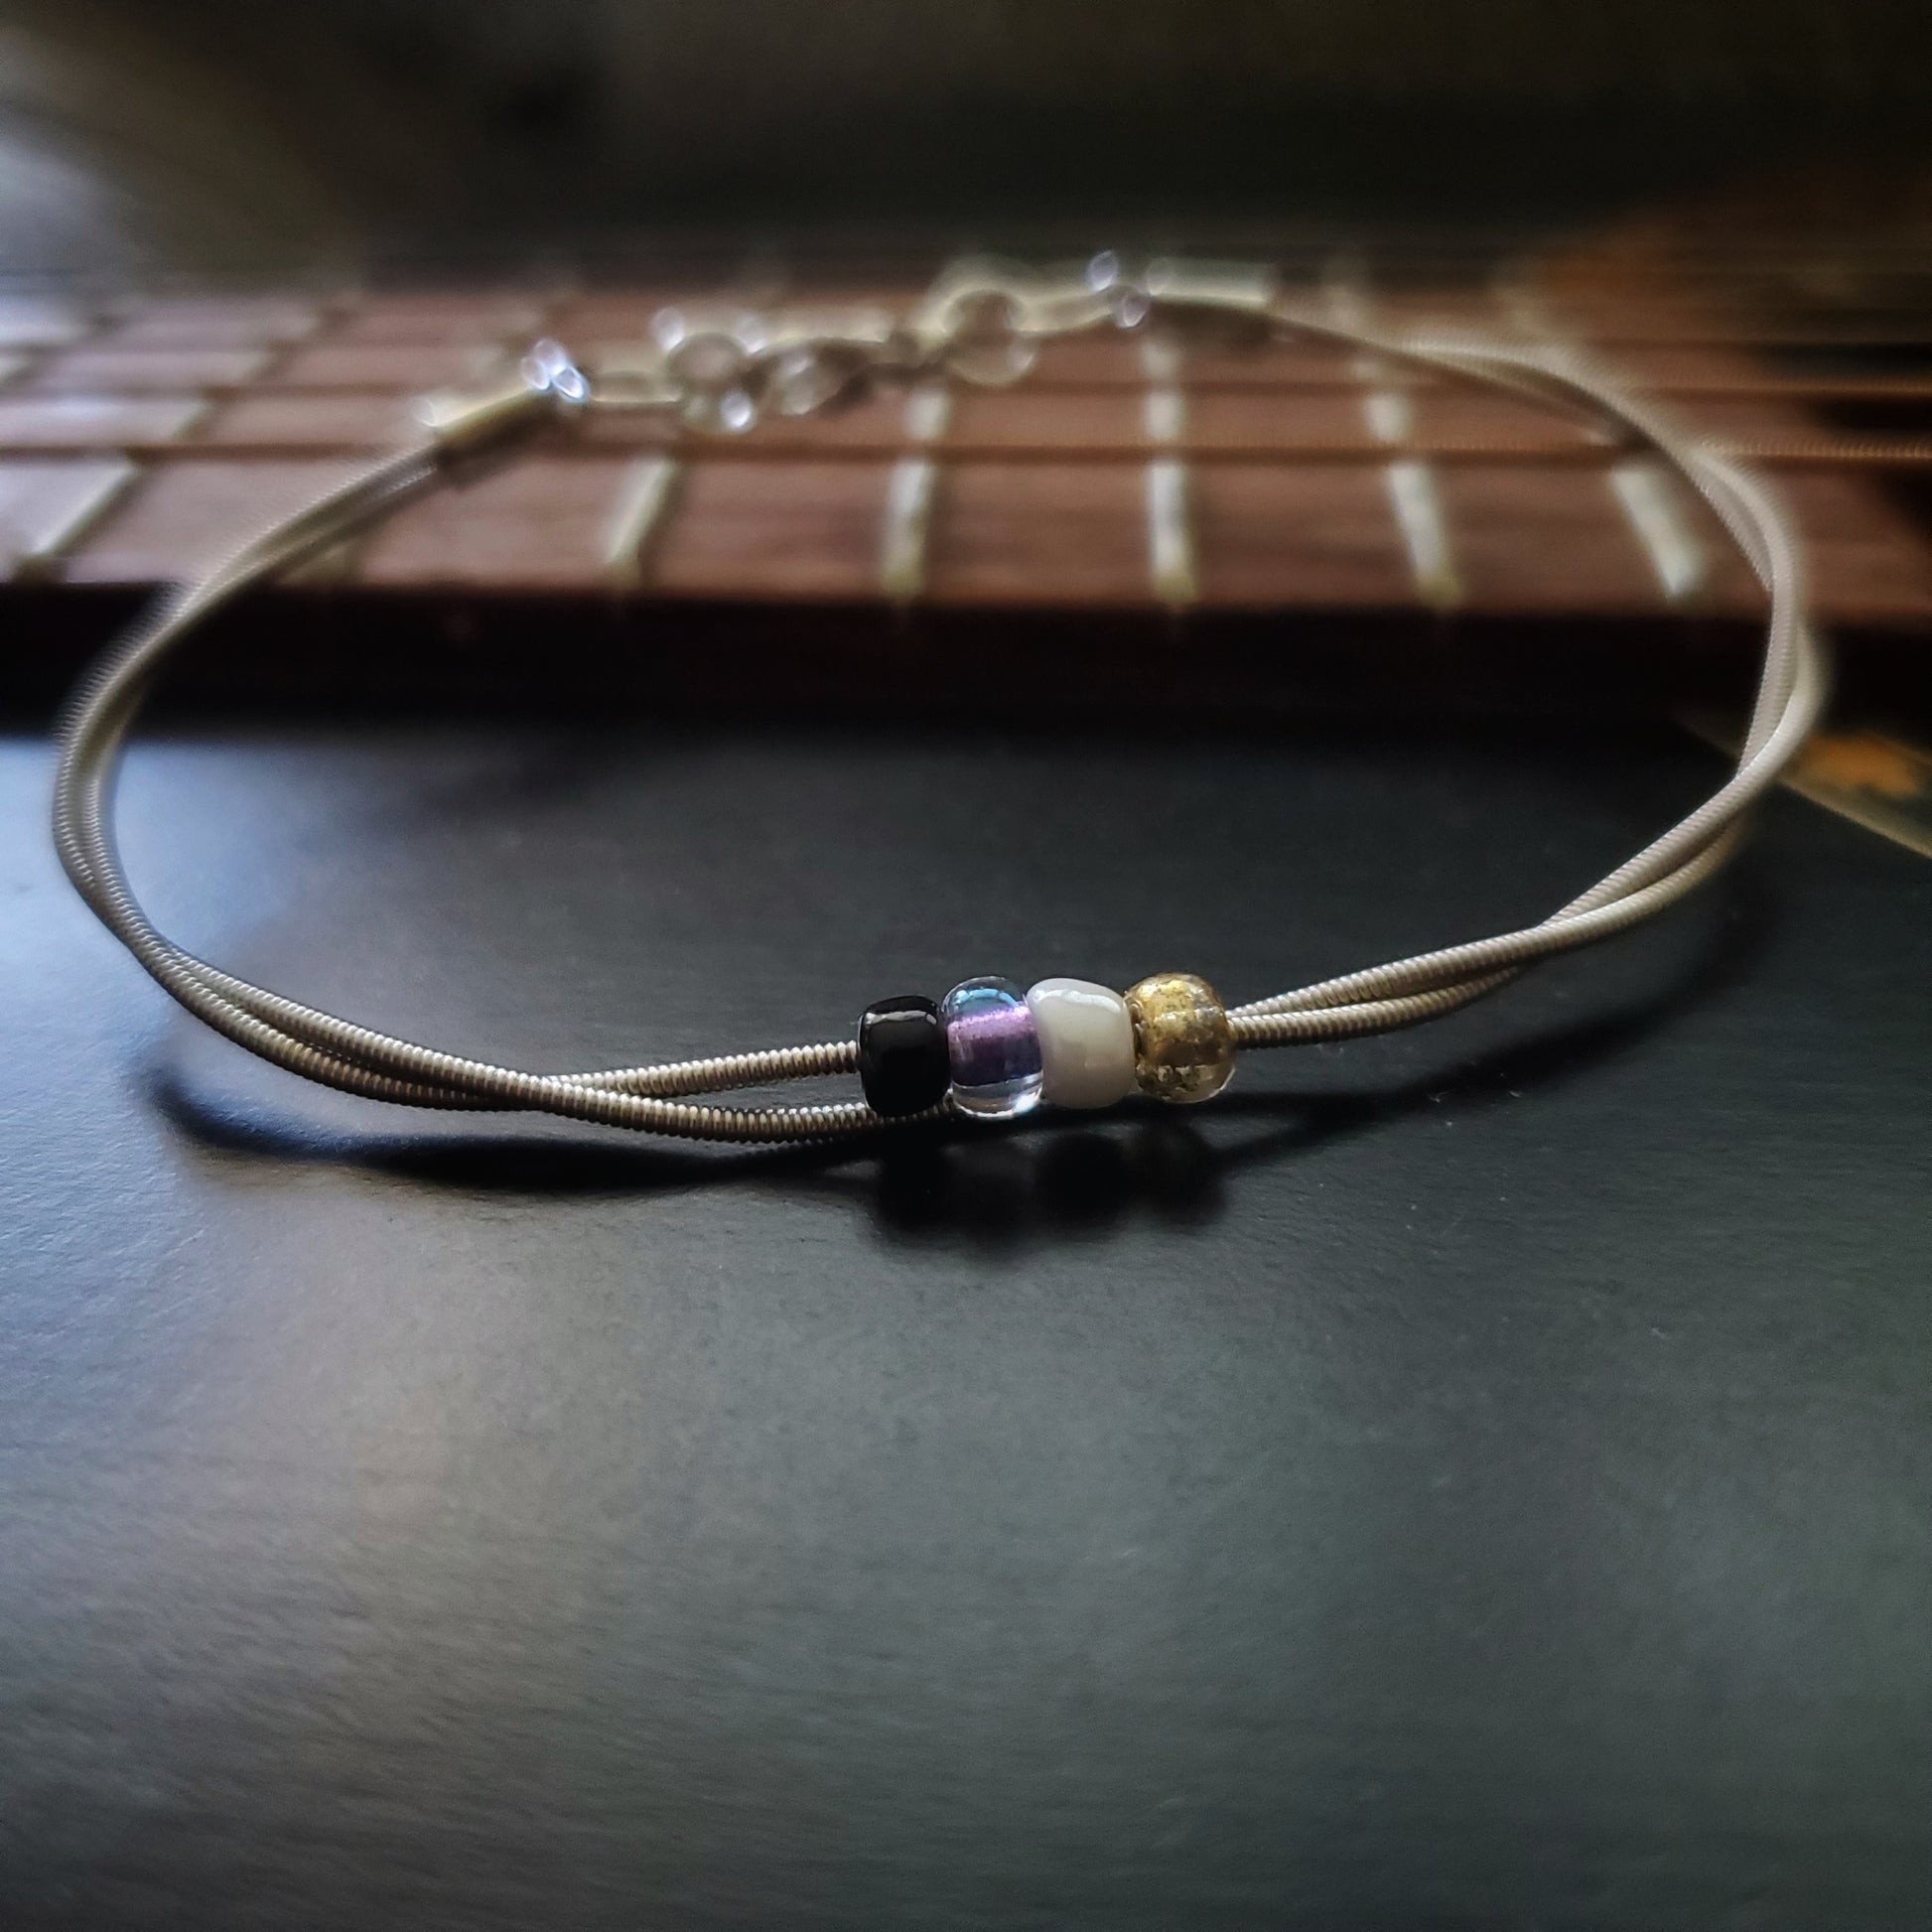 silver coloures clasp style bracelet with 4 glass beads representing the non-binary flag (yellow, white, purple & black) -bracelet is in front of a guitar neck that has no strings